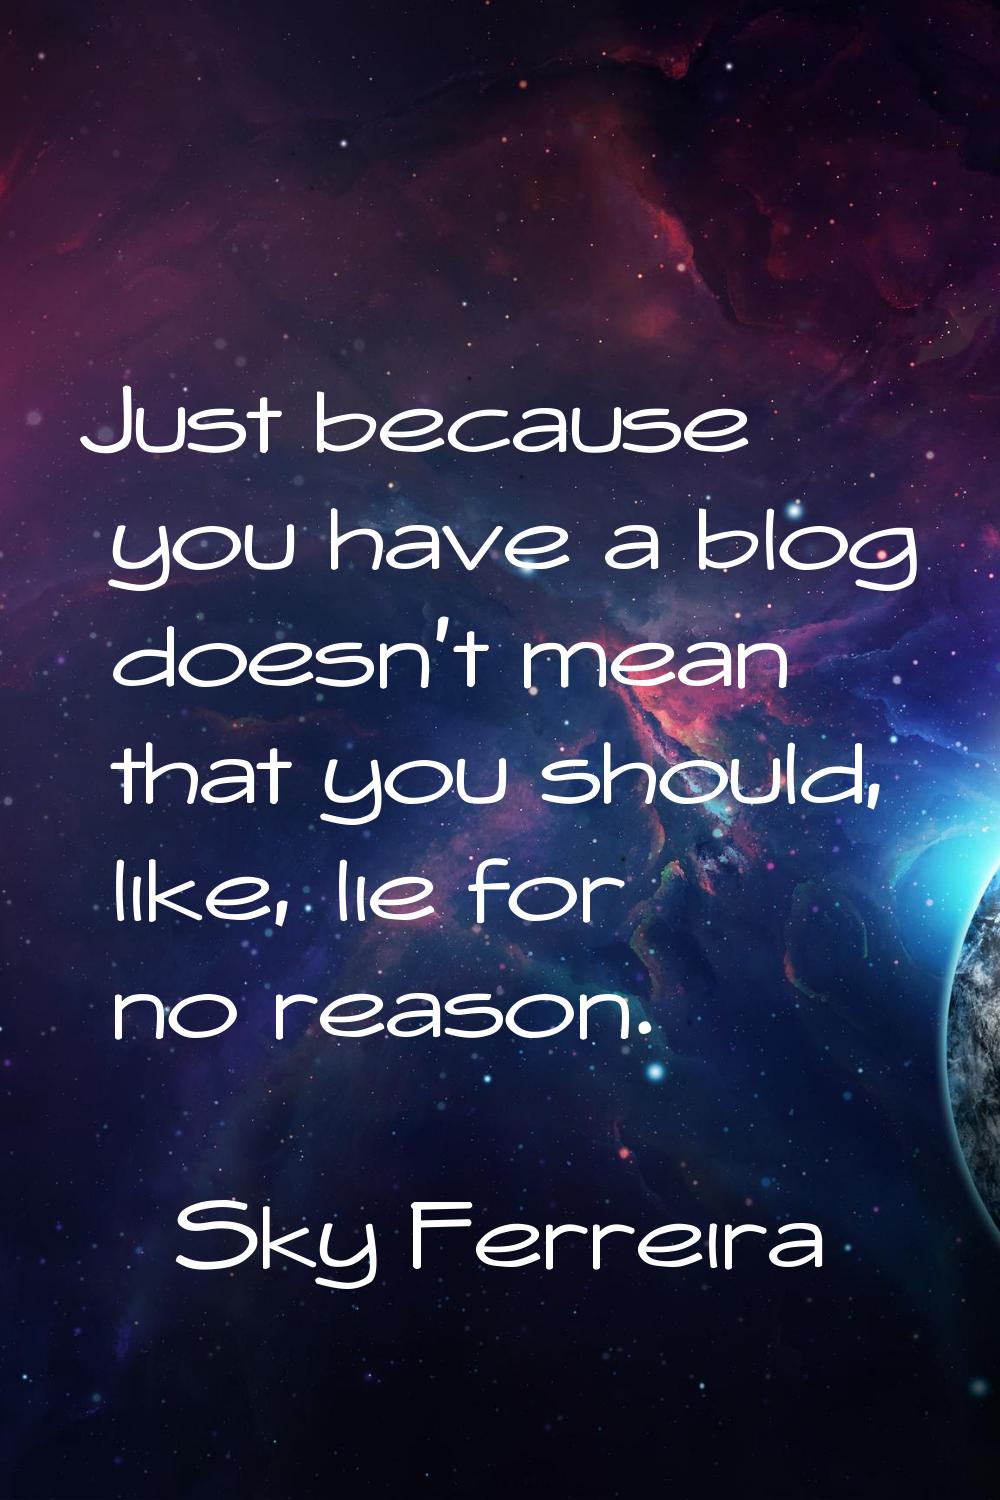 Just because you have a blog doesn't mean that you should, like, lie for no reason.